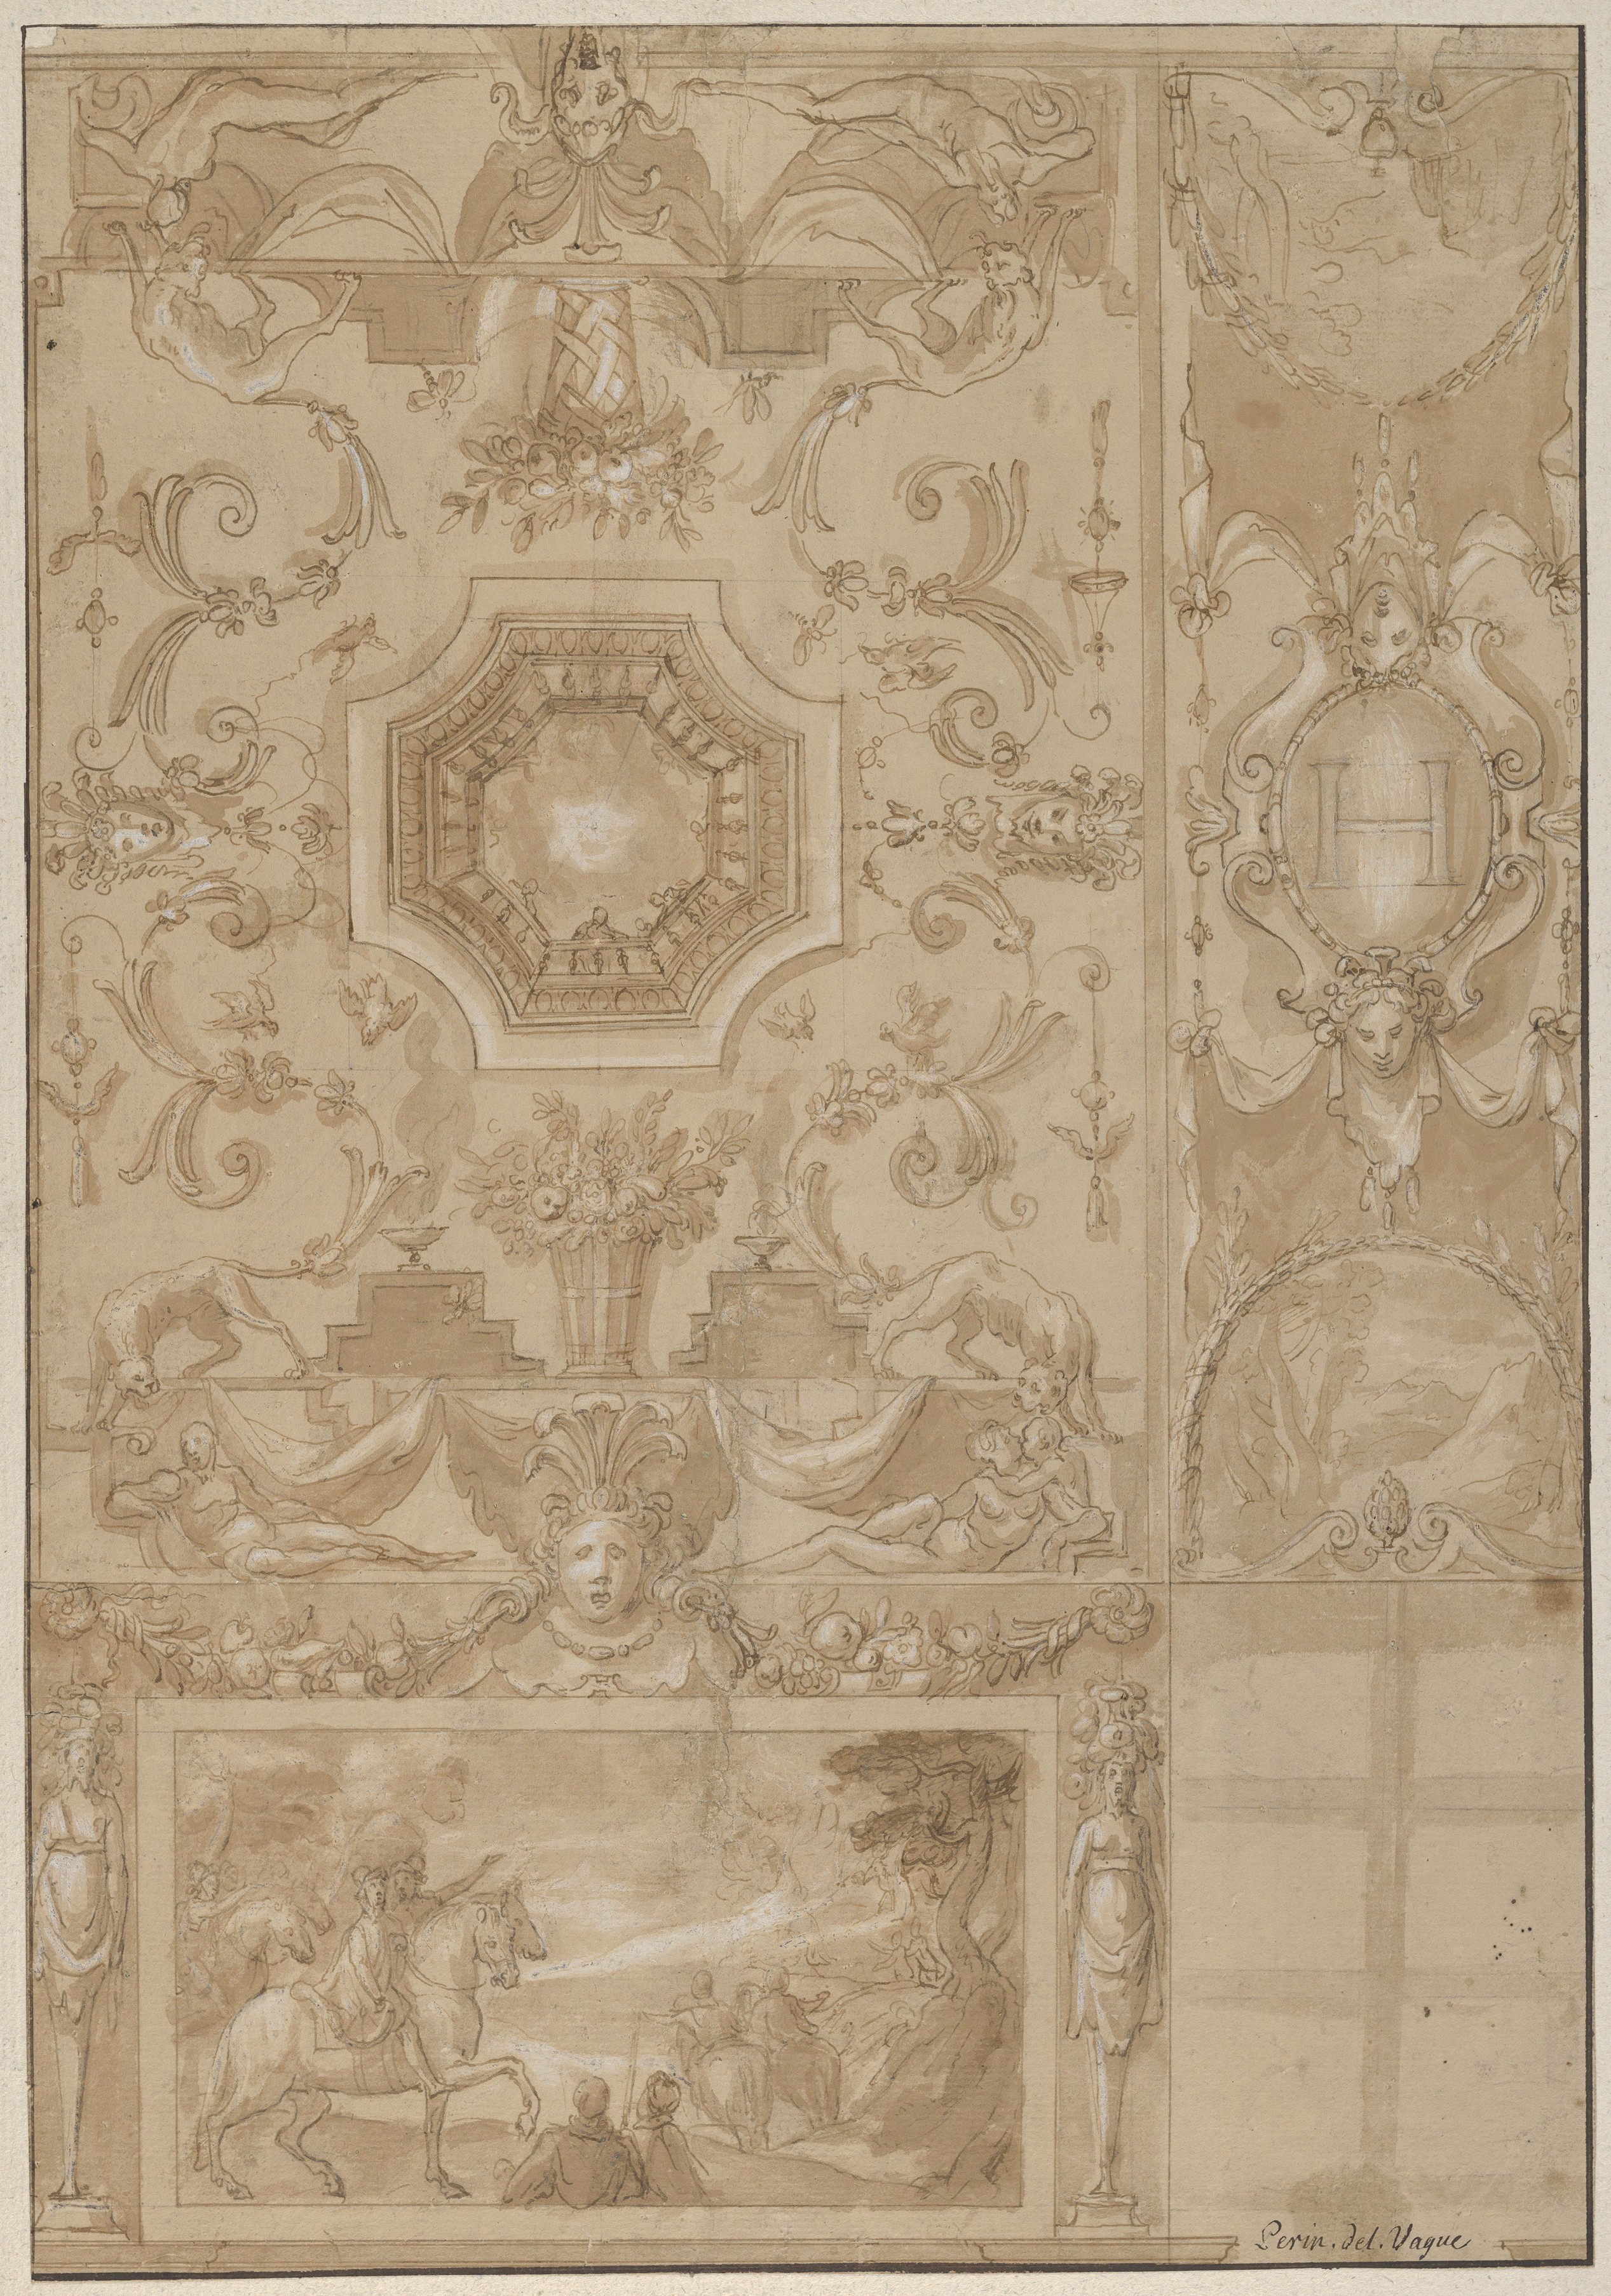 Toussaint Dubreuil | Design for a Decorated Wall and Ceiling of a ...